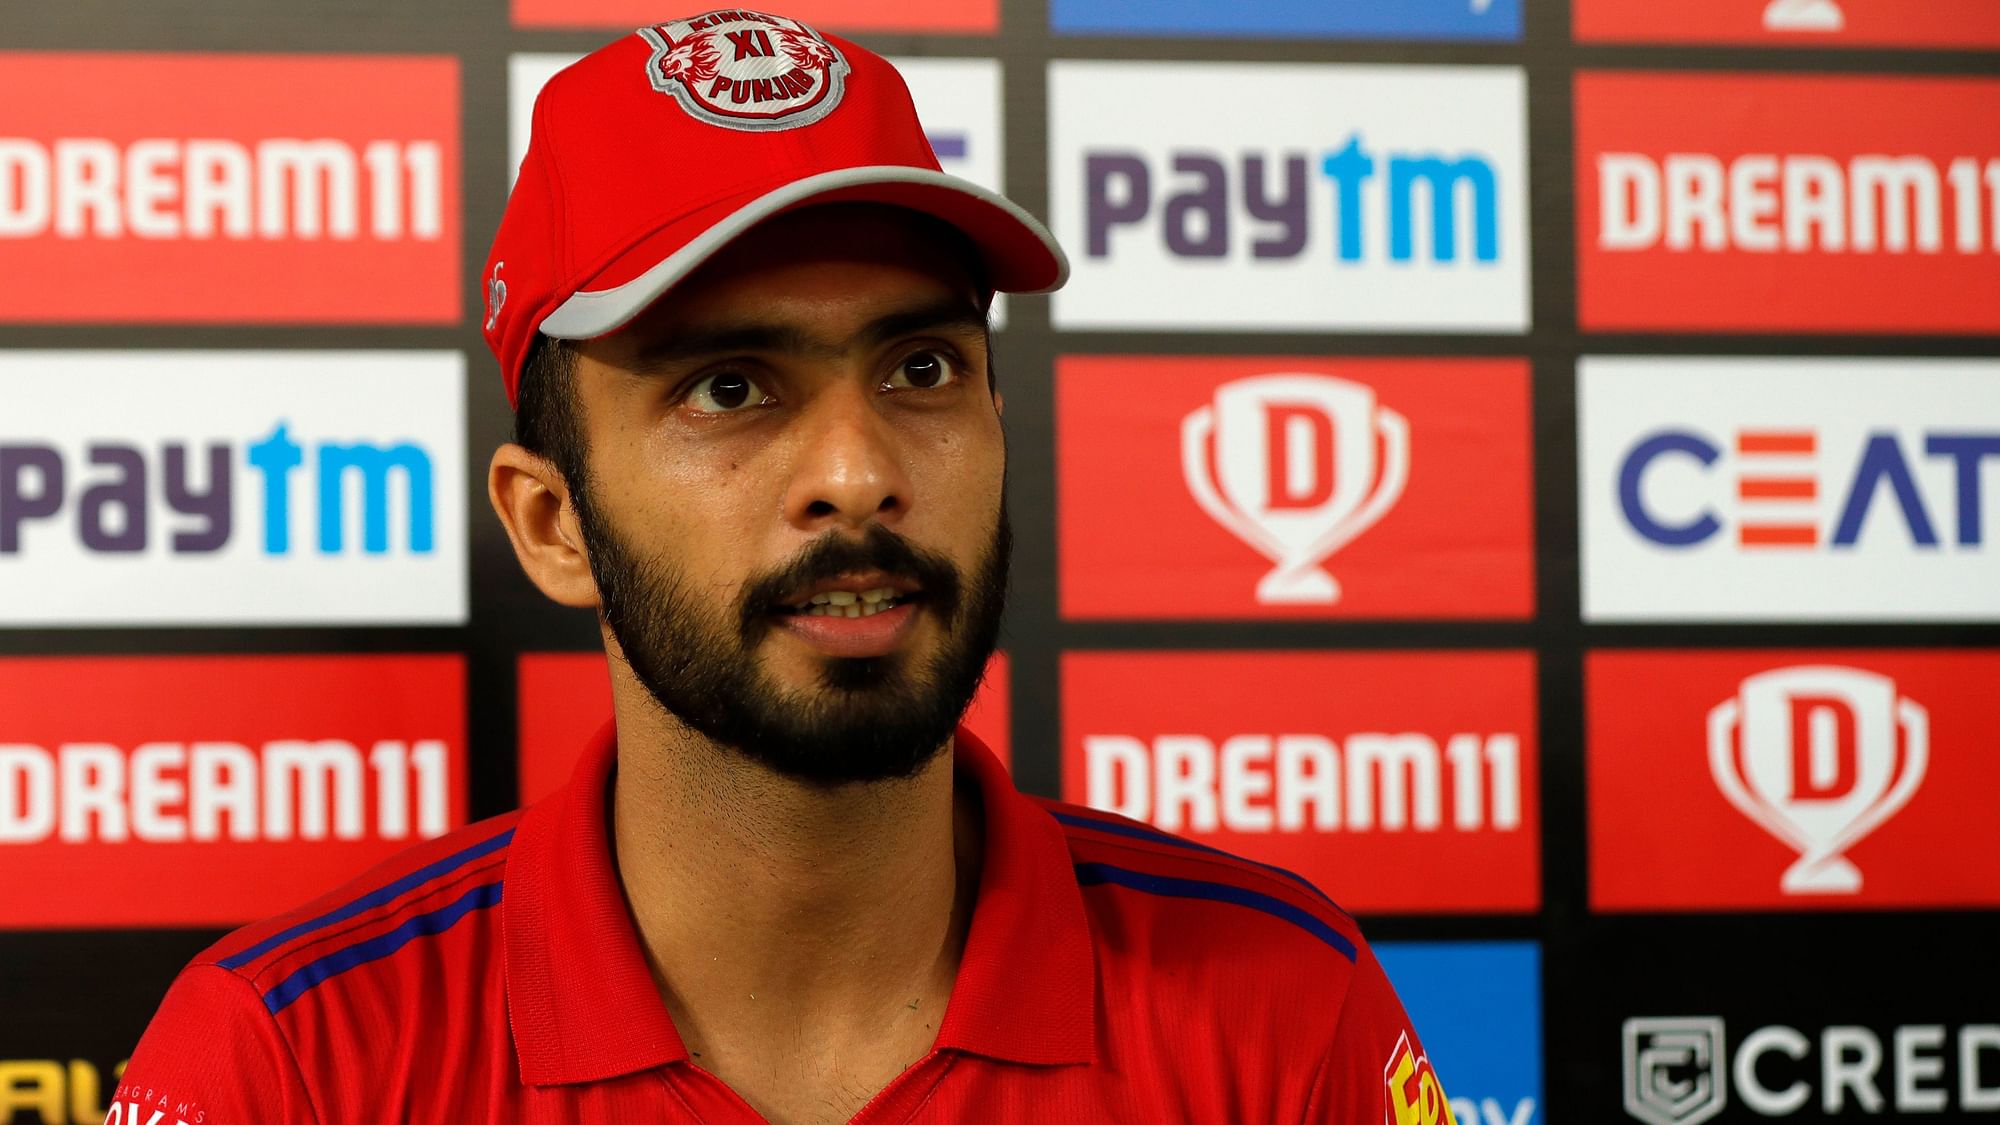 Mandeep Singh, who played his first game for Kings XI Punjab this season, scored a quickfire 27 runs off 16 balls